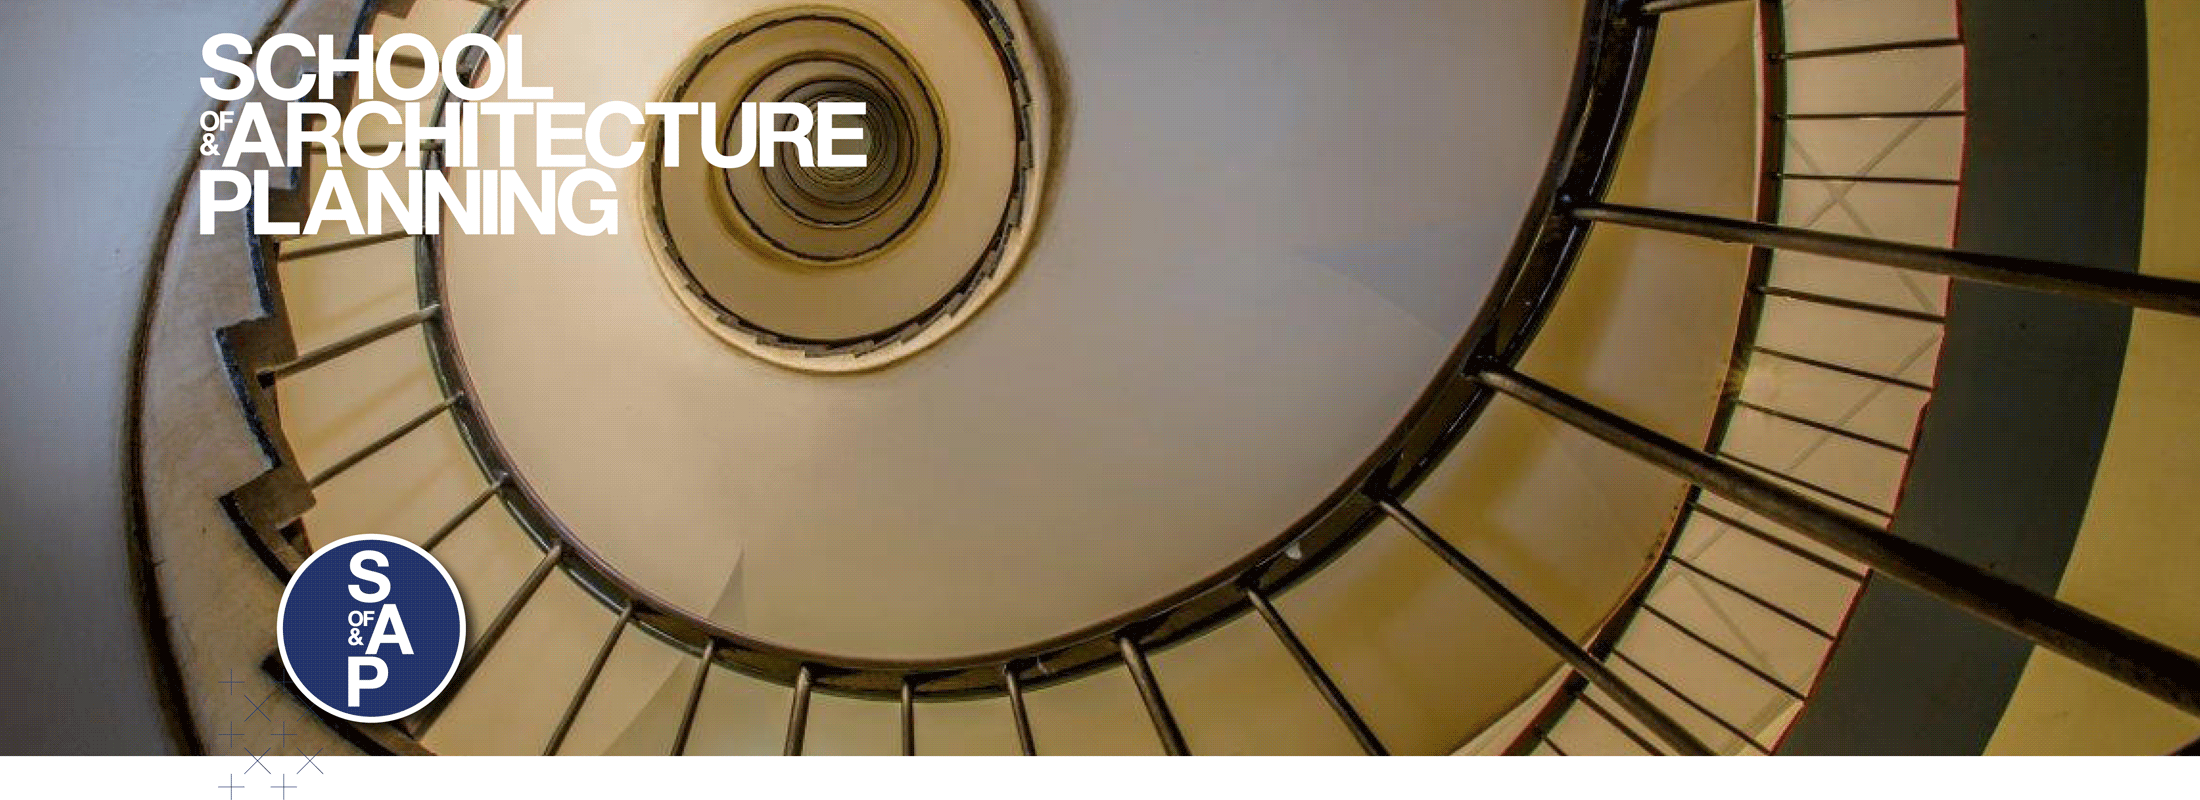 Spiral staircase in John Moffat Building